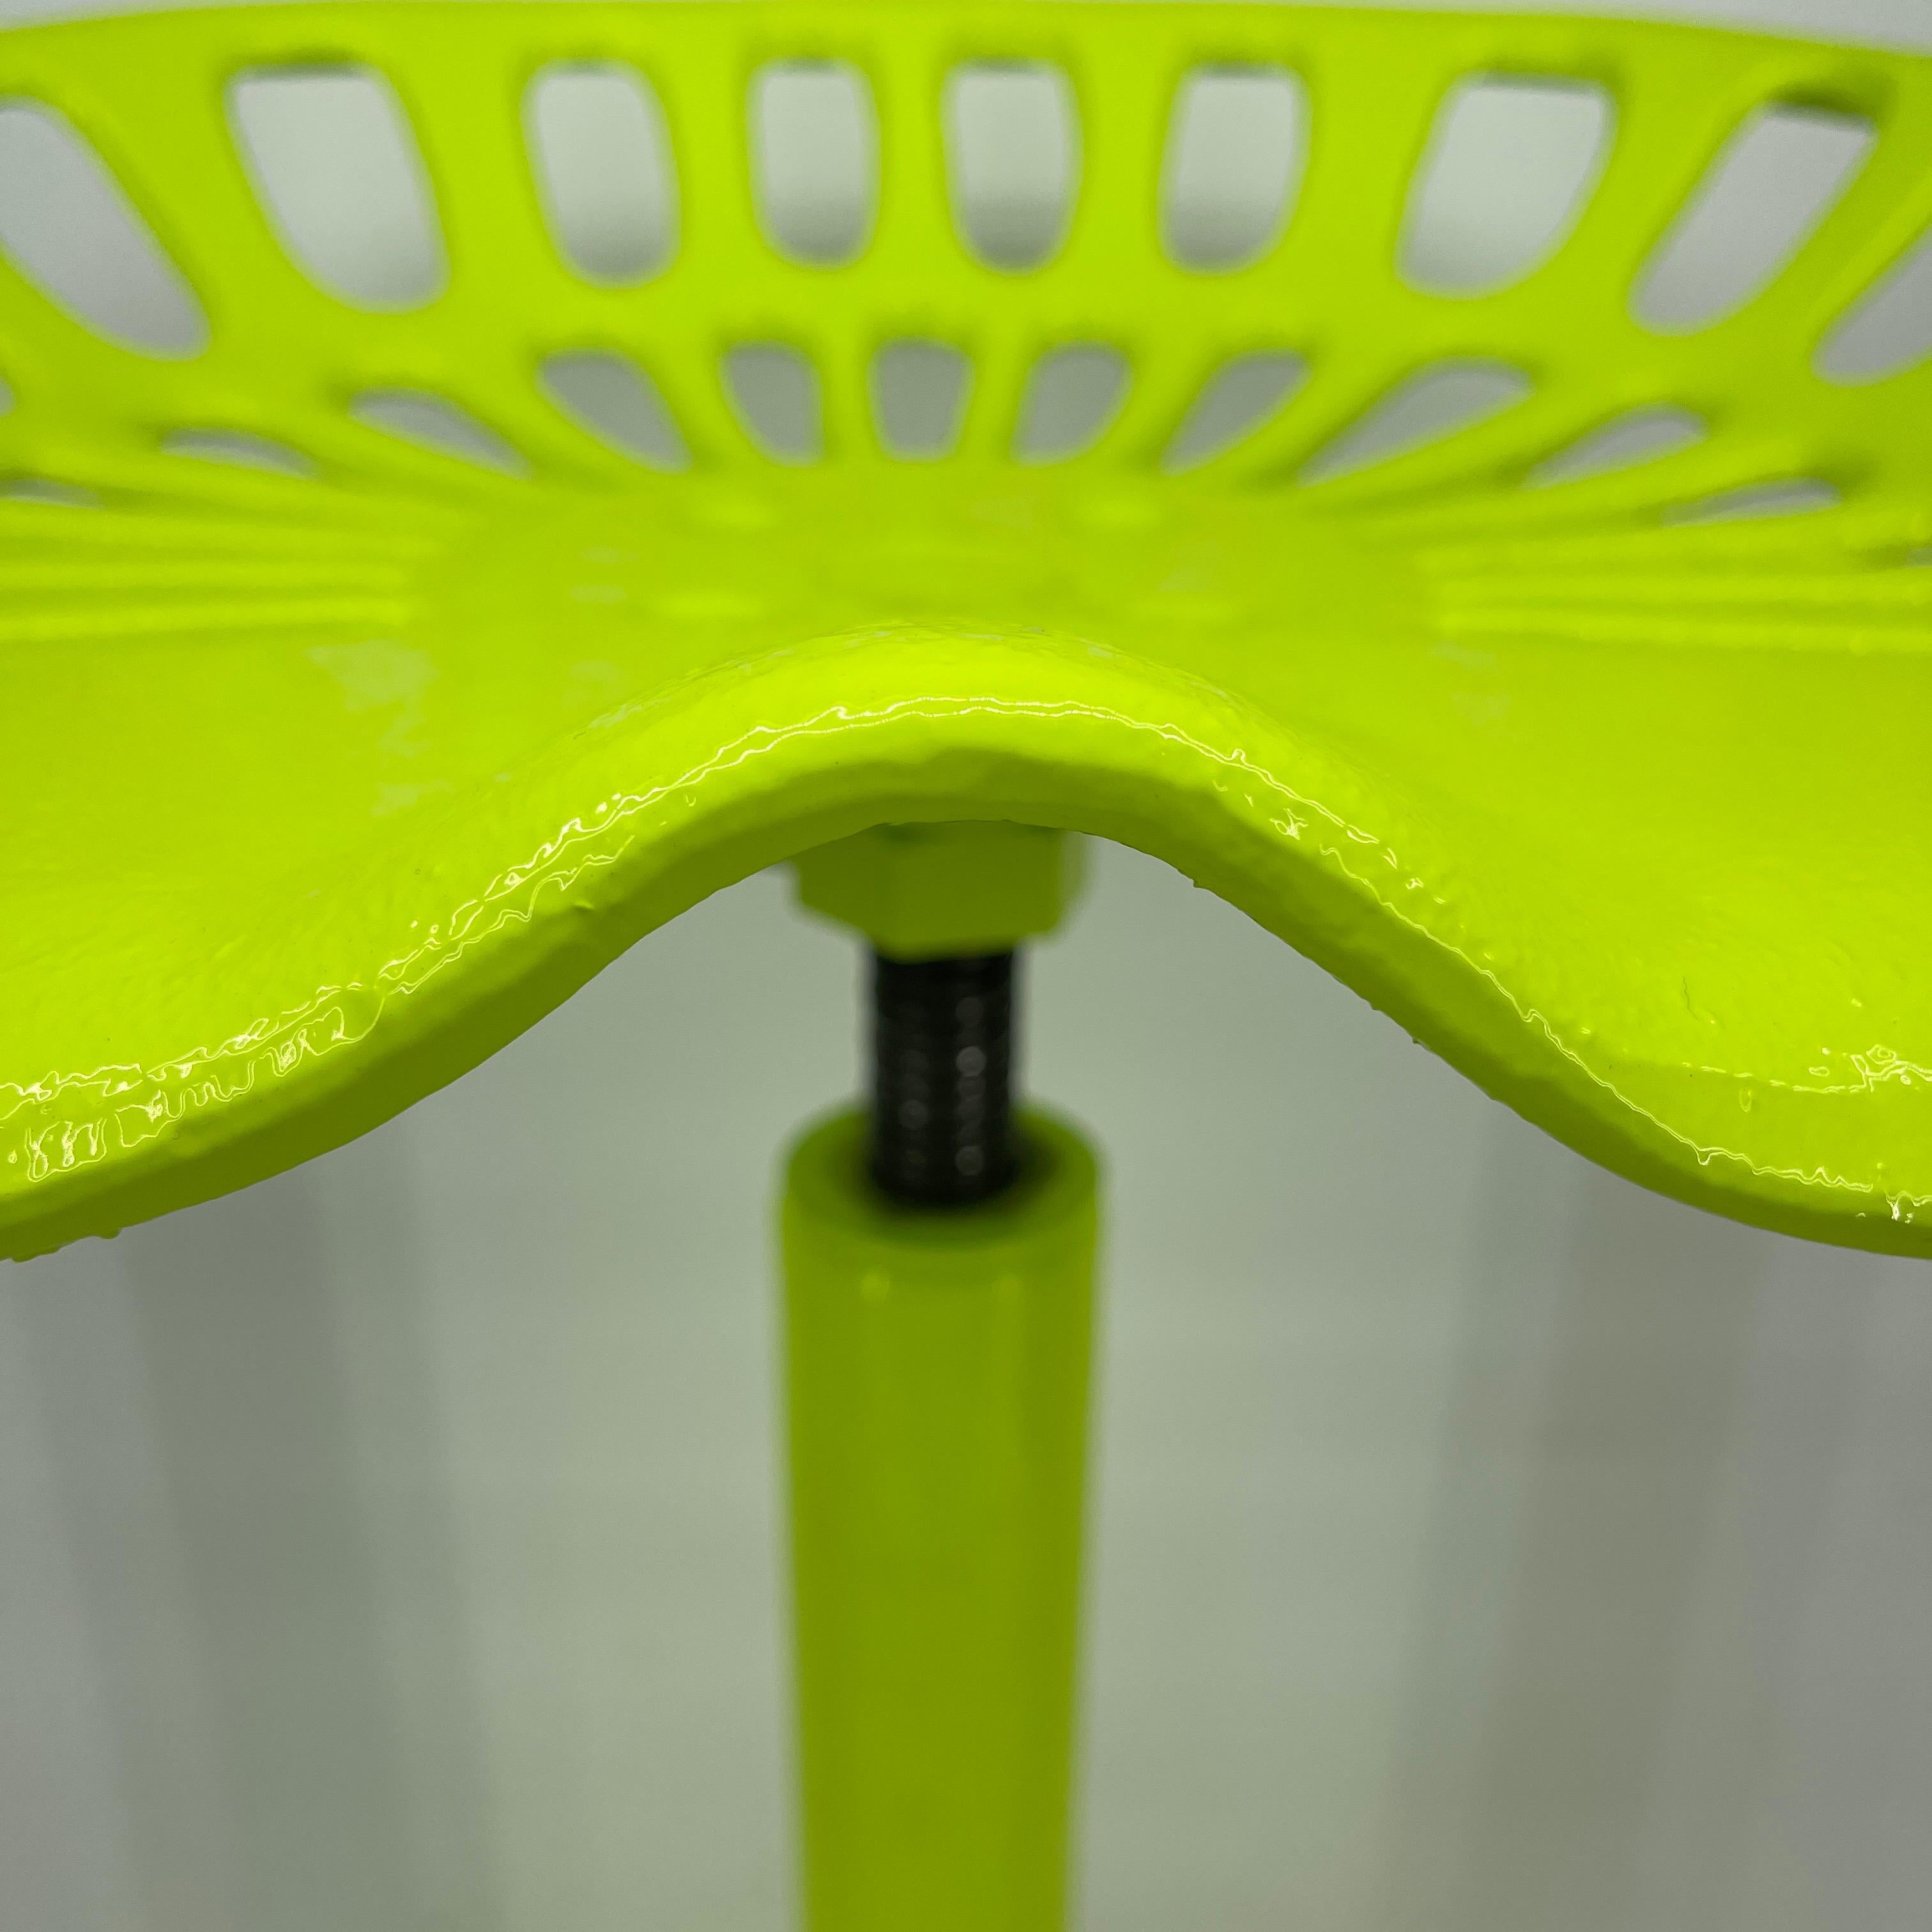 Vintage Industrial Metal Tractor Seat Stool, Powder Coated Chartreuse For Sale 6